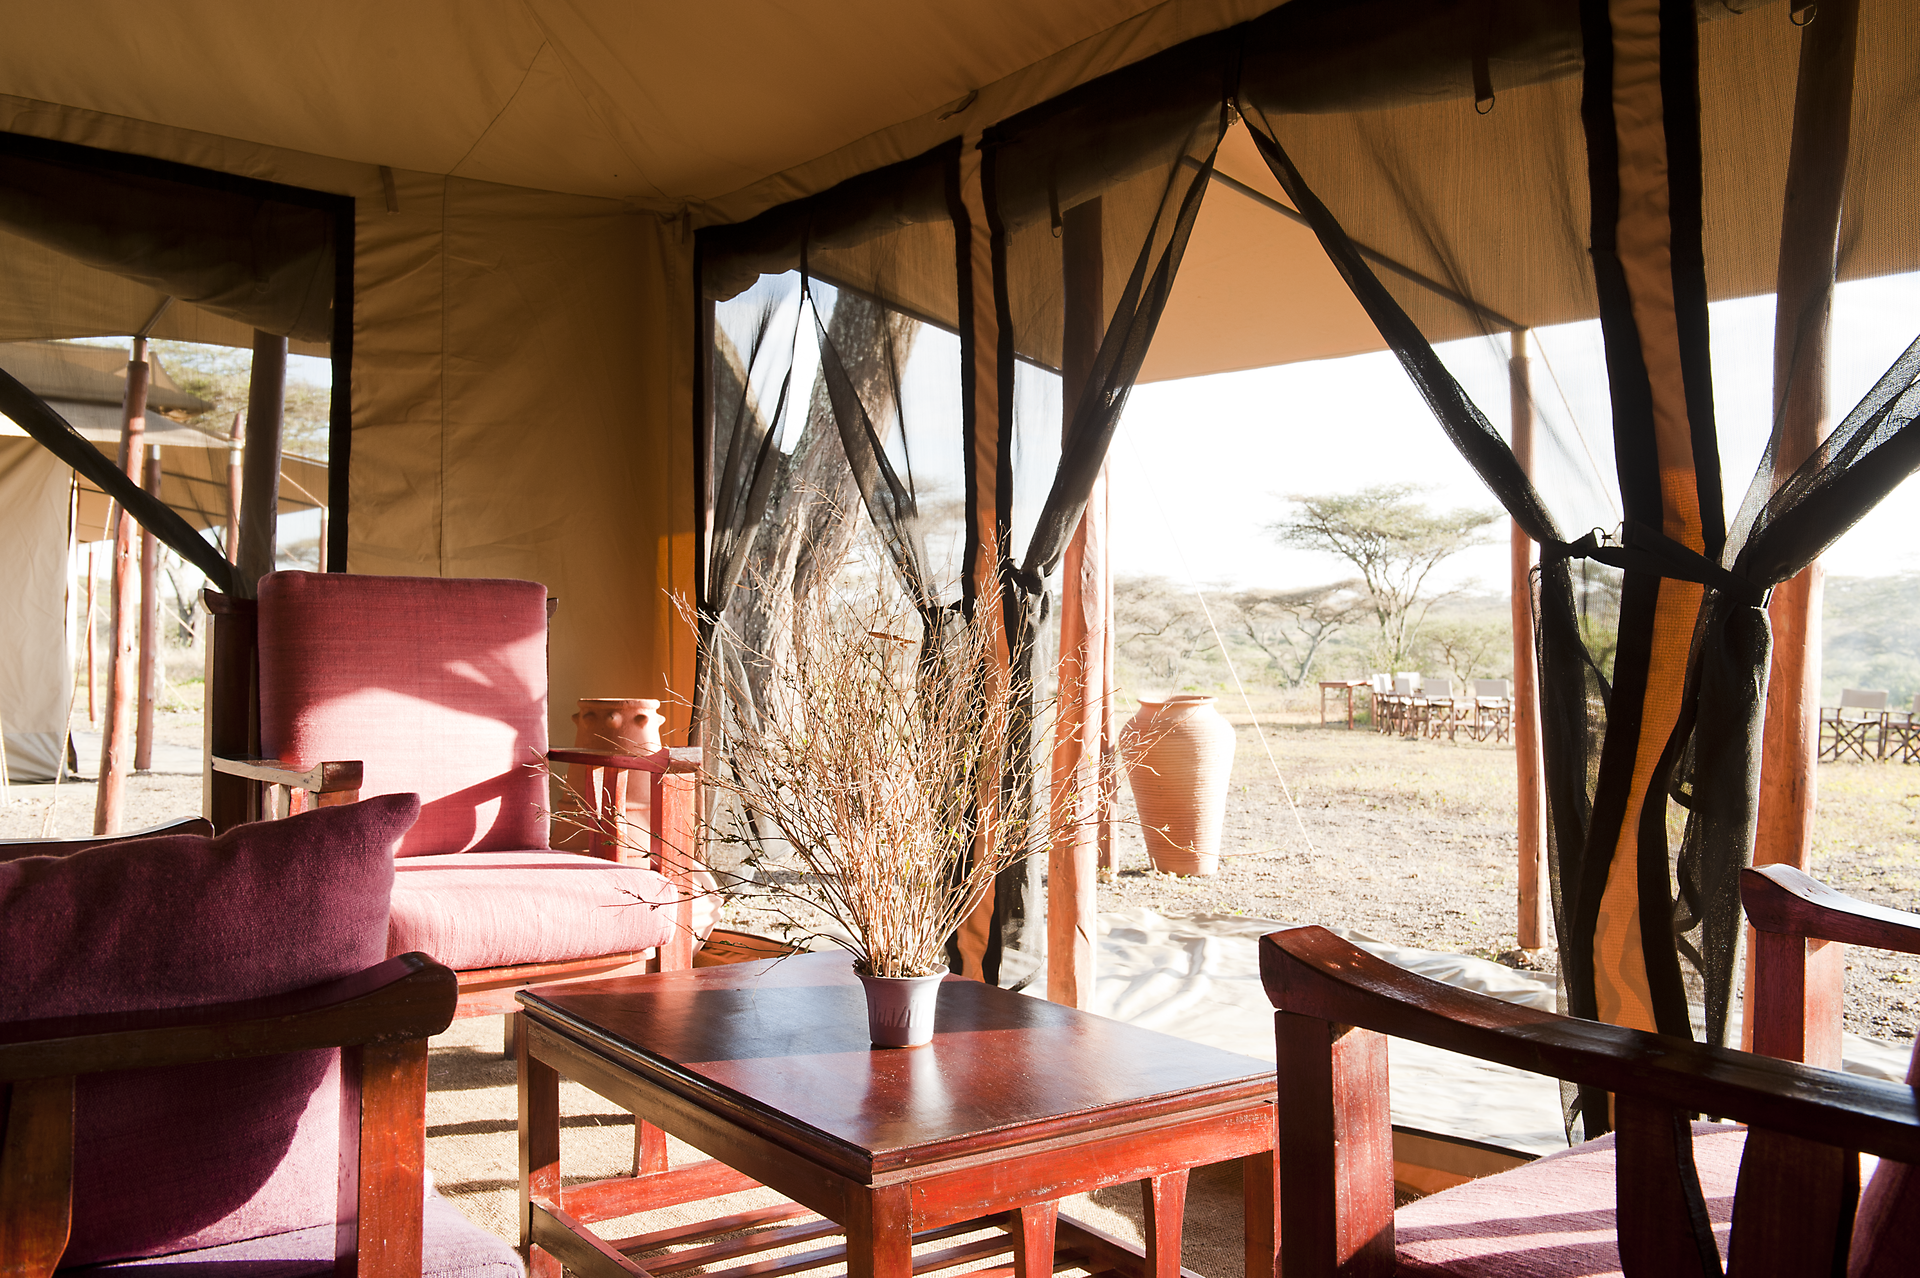 Southern Serengeti – Recommended Dec-Mar